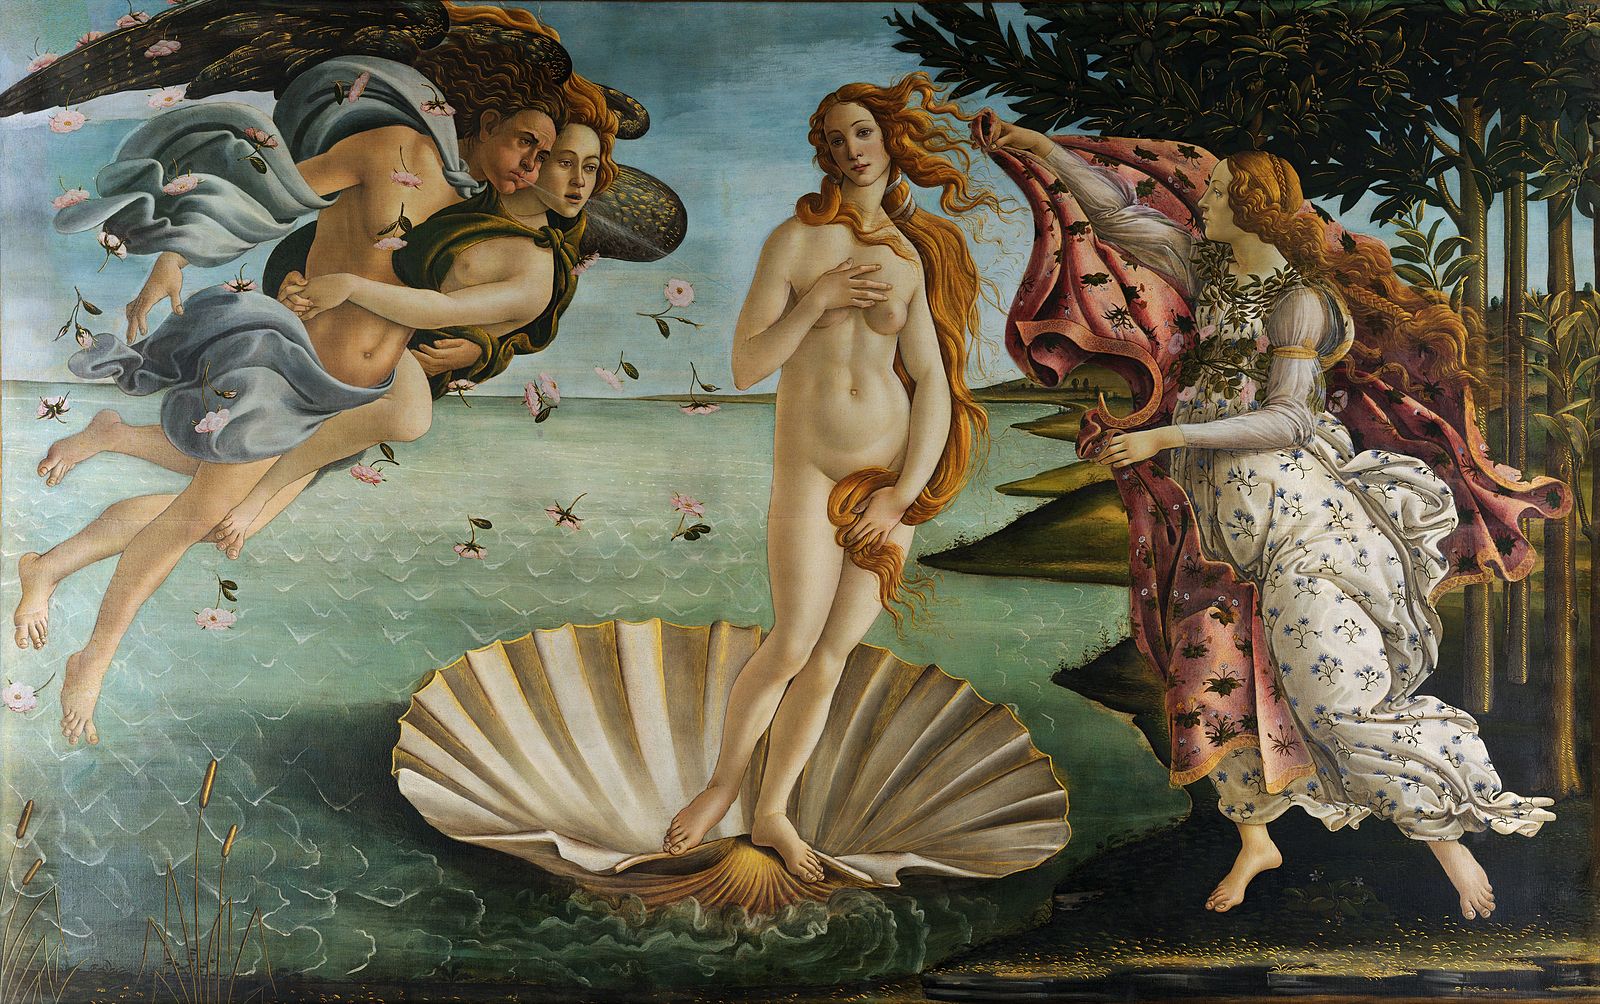 this painting portrays a nude woman standing in a large scallop shell